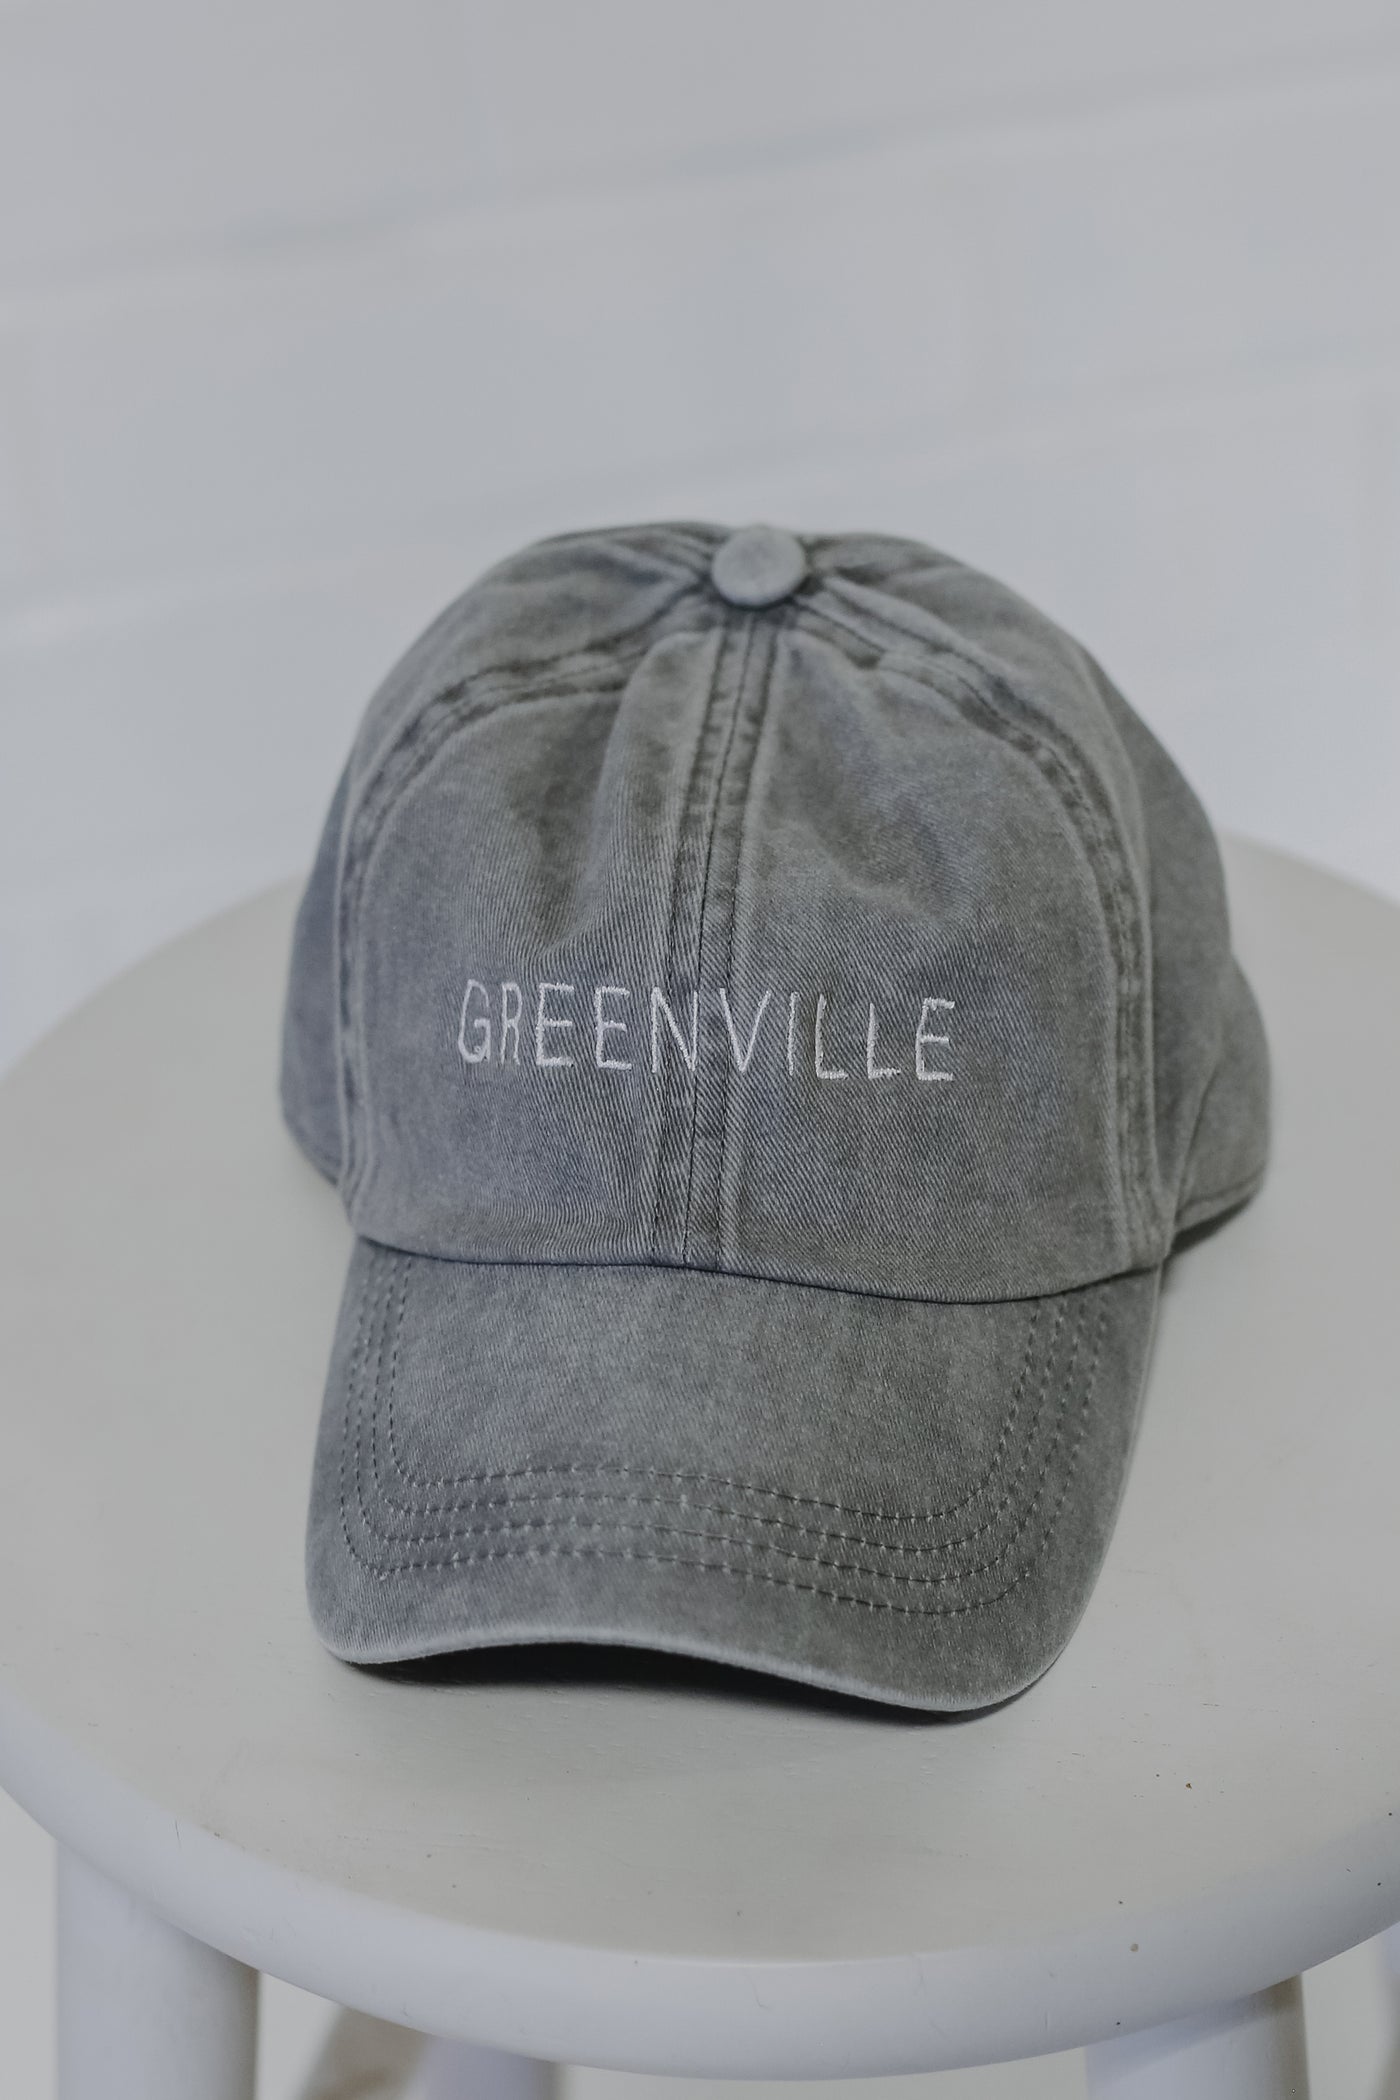 Greenville Embroidered Hat in grey flat lay